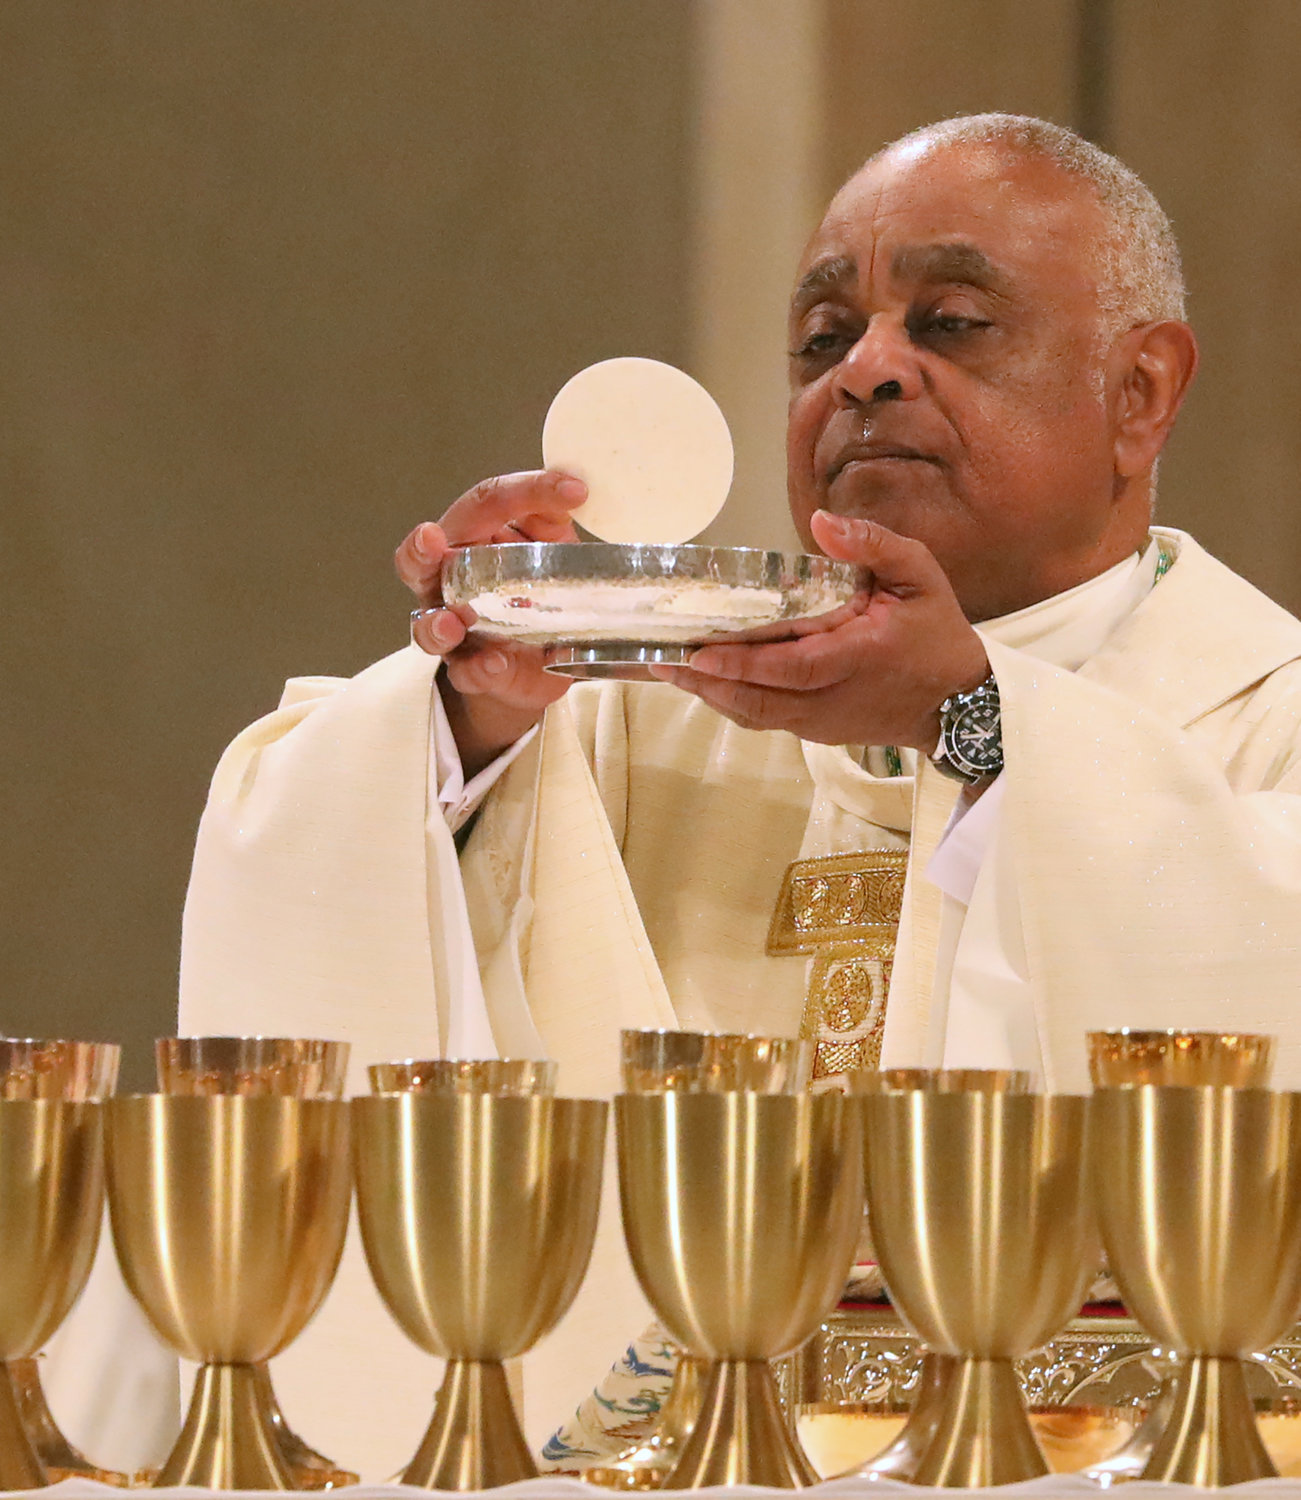 Archbishop Wilton D. Gregory displays the papal bull on his appointment to Washington during his installation Mass at the Basilica of the National Shrine of the Immaculate Conception in Washington May 21, 2019.